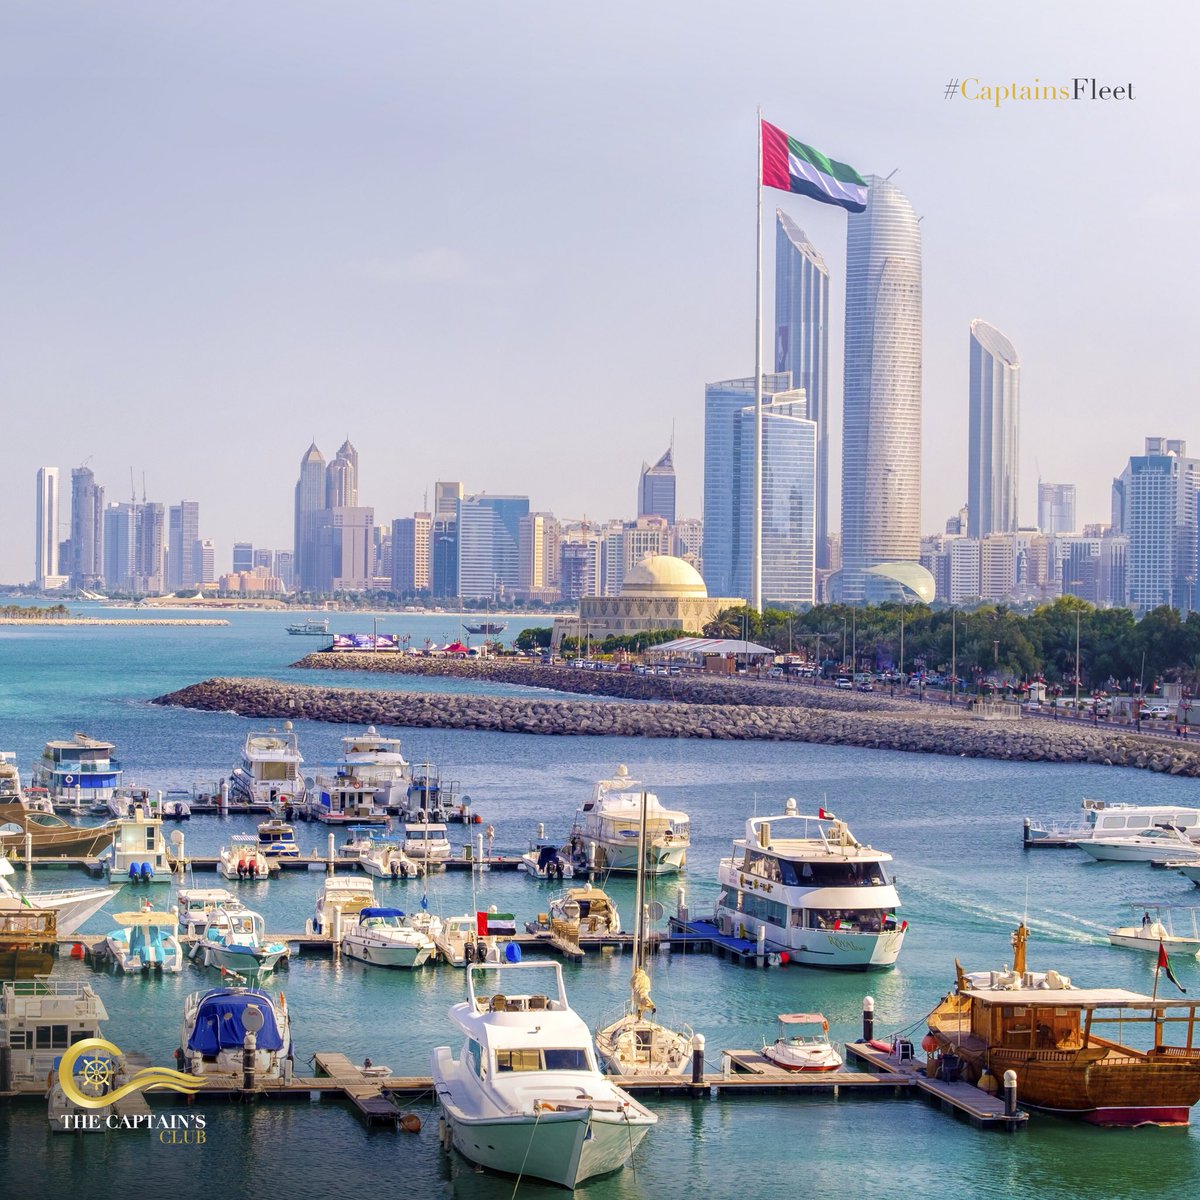 Look at our fleet on fleek! ⚓️ We are UAE's biggest boat club offering an alternative solution to boat ownership so you can #BeTheCaptain.

#CaptainsFleet